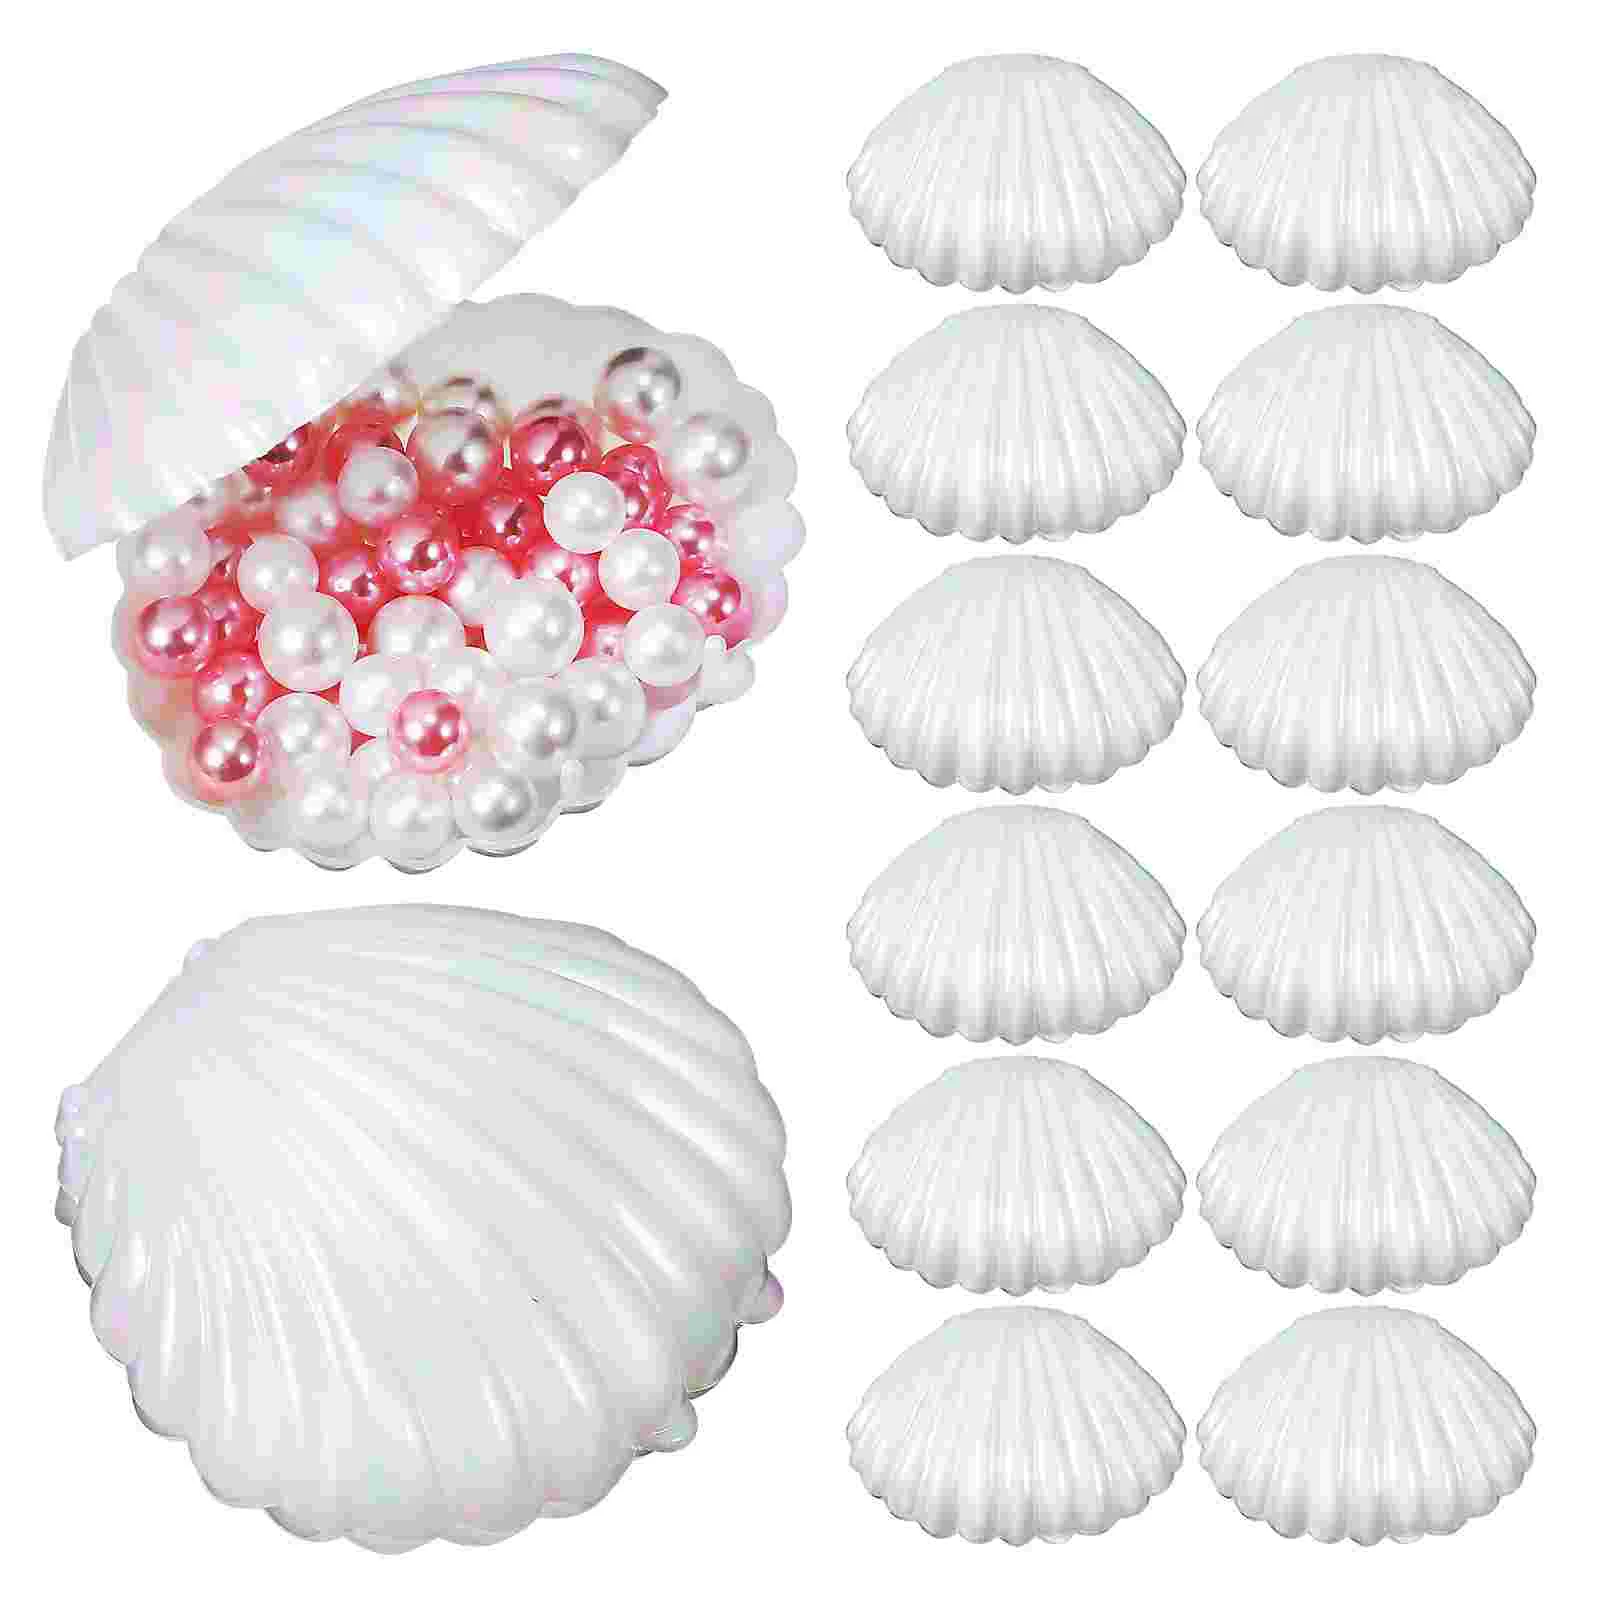 

Sea Shell Candy Boxes Seashell Party Favor Containers Clam Treat Holders Plastic Chocolate Box Mini Jewelry Box Wedding Birthday